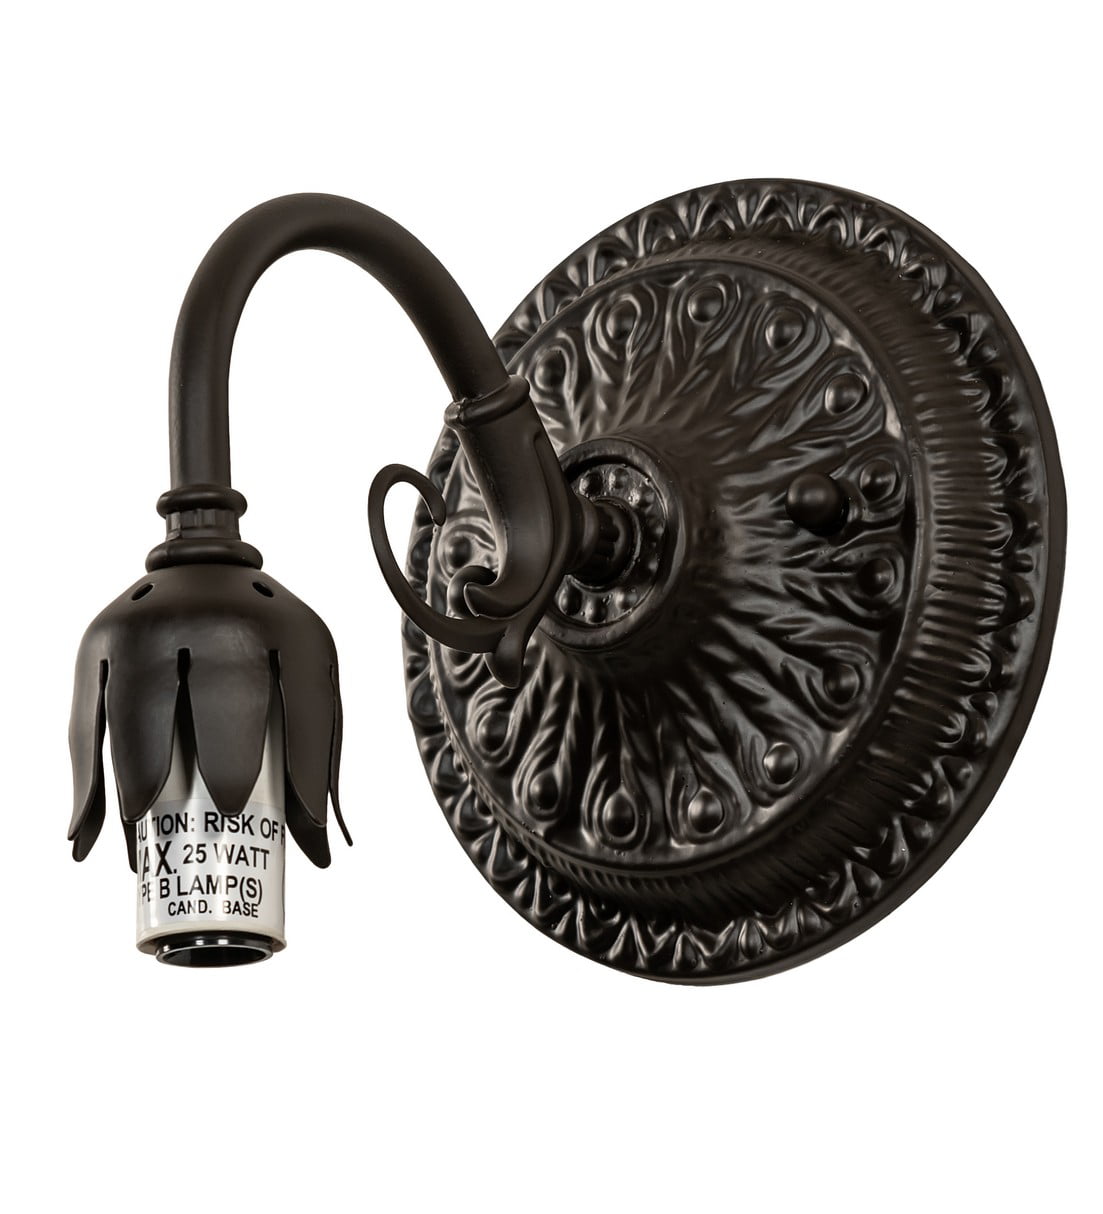 5" Wide Wall Sconce Hardware